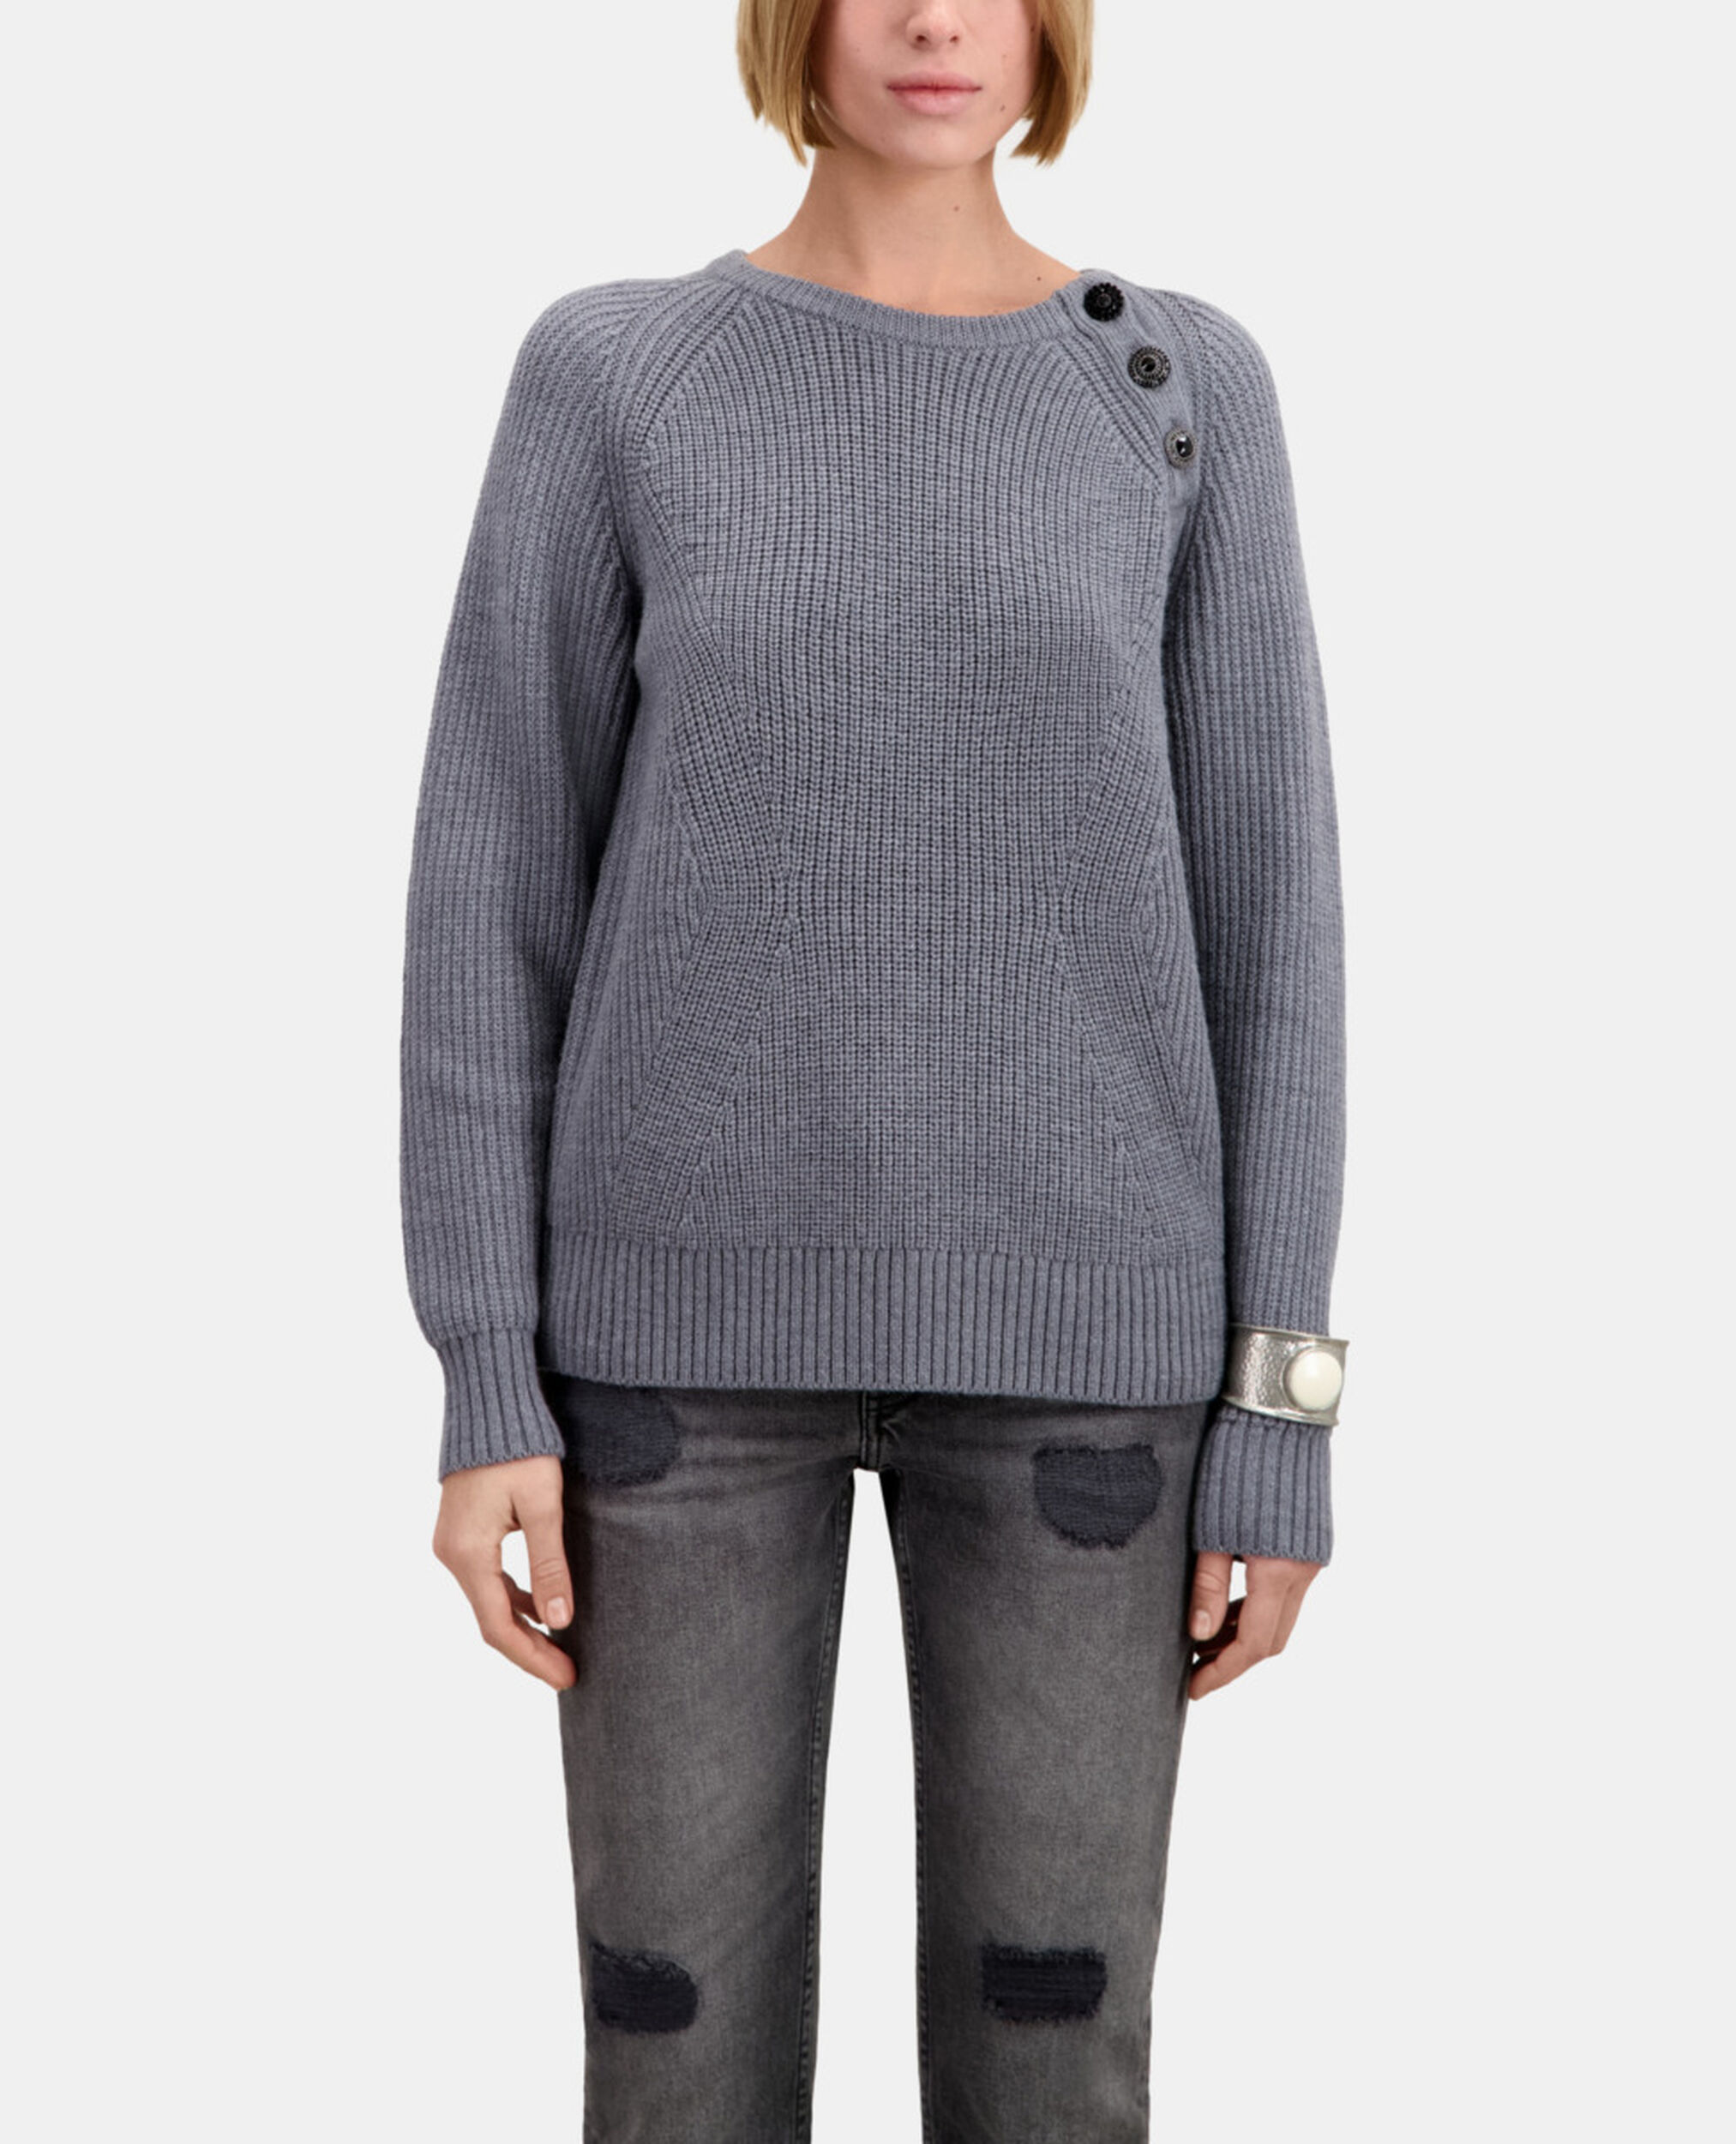 Grey wool sweater with bijou buttons, MIDDLE GREY MEL, hi-res image number null